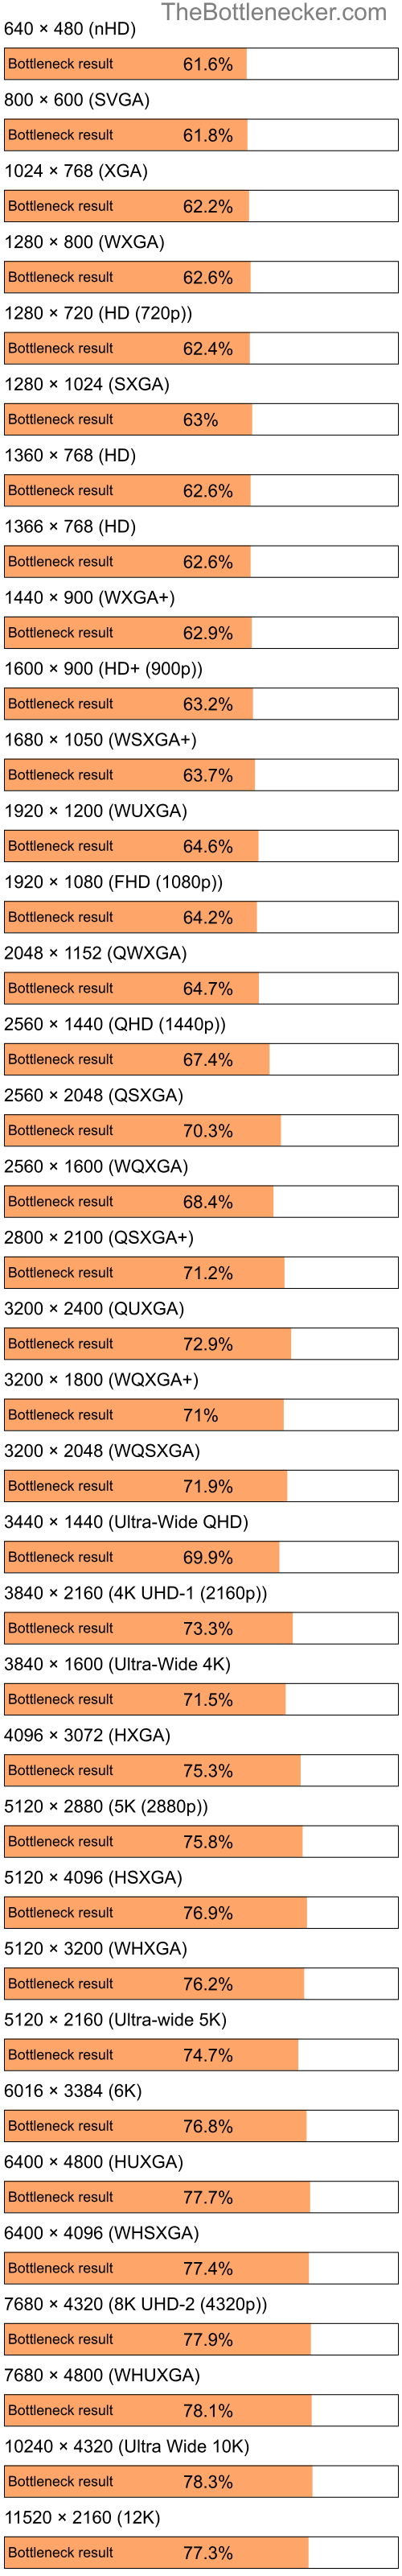 Bottleneck results by resolution for Intel Pentium 4 and NVIDIA Quadro NVS 130M in General Tasks